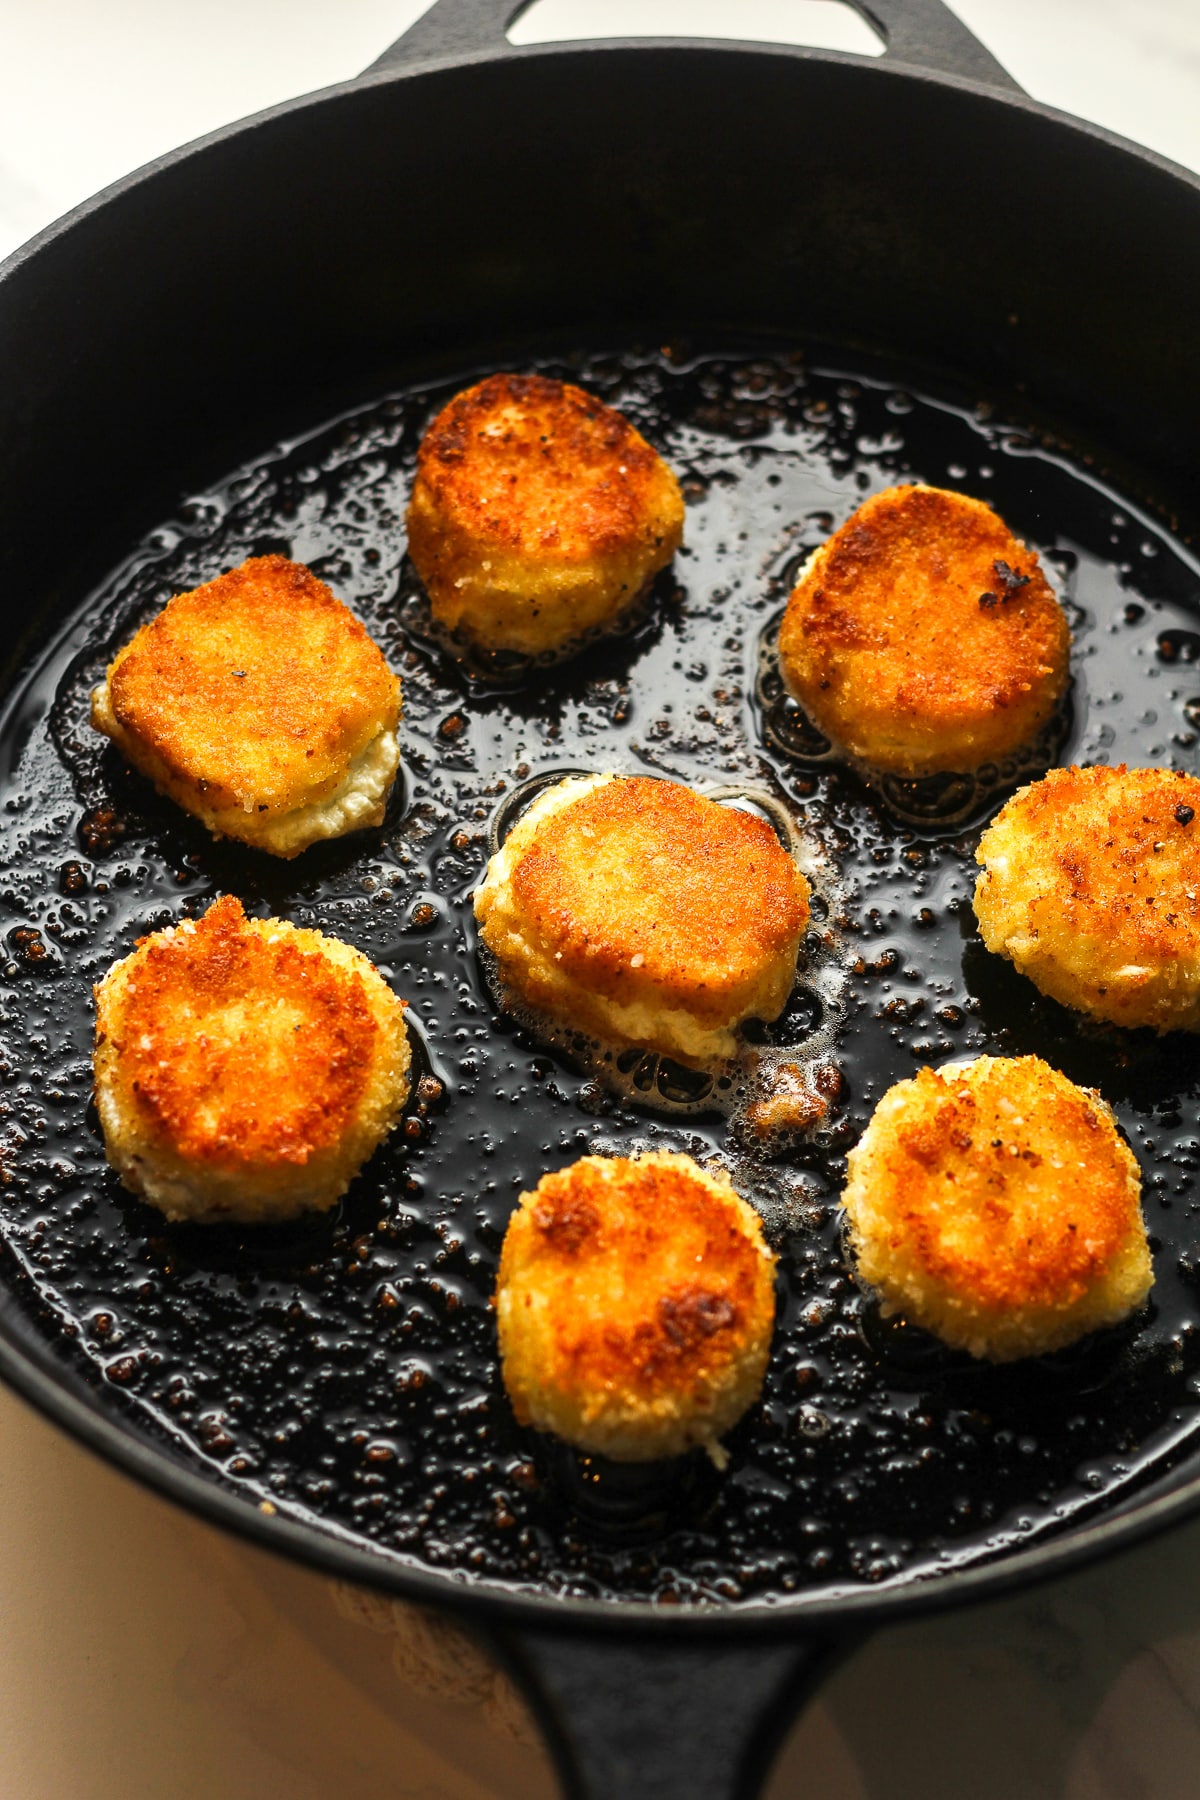 How to make Fried Goat Cheese